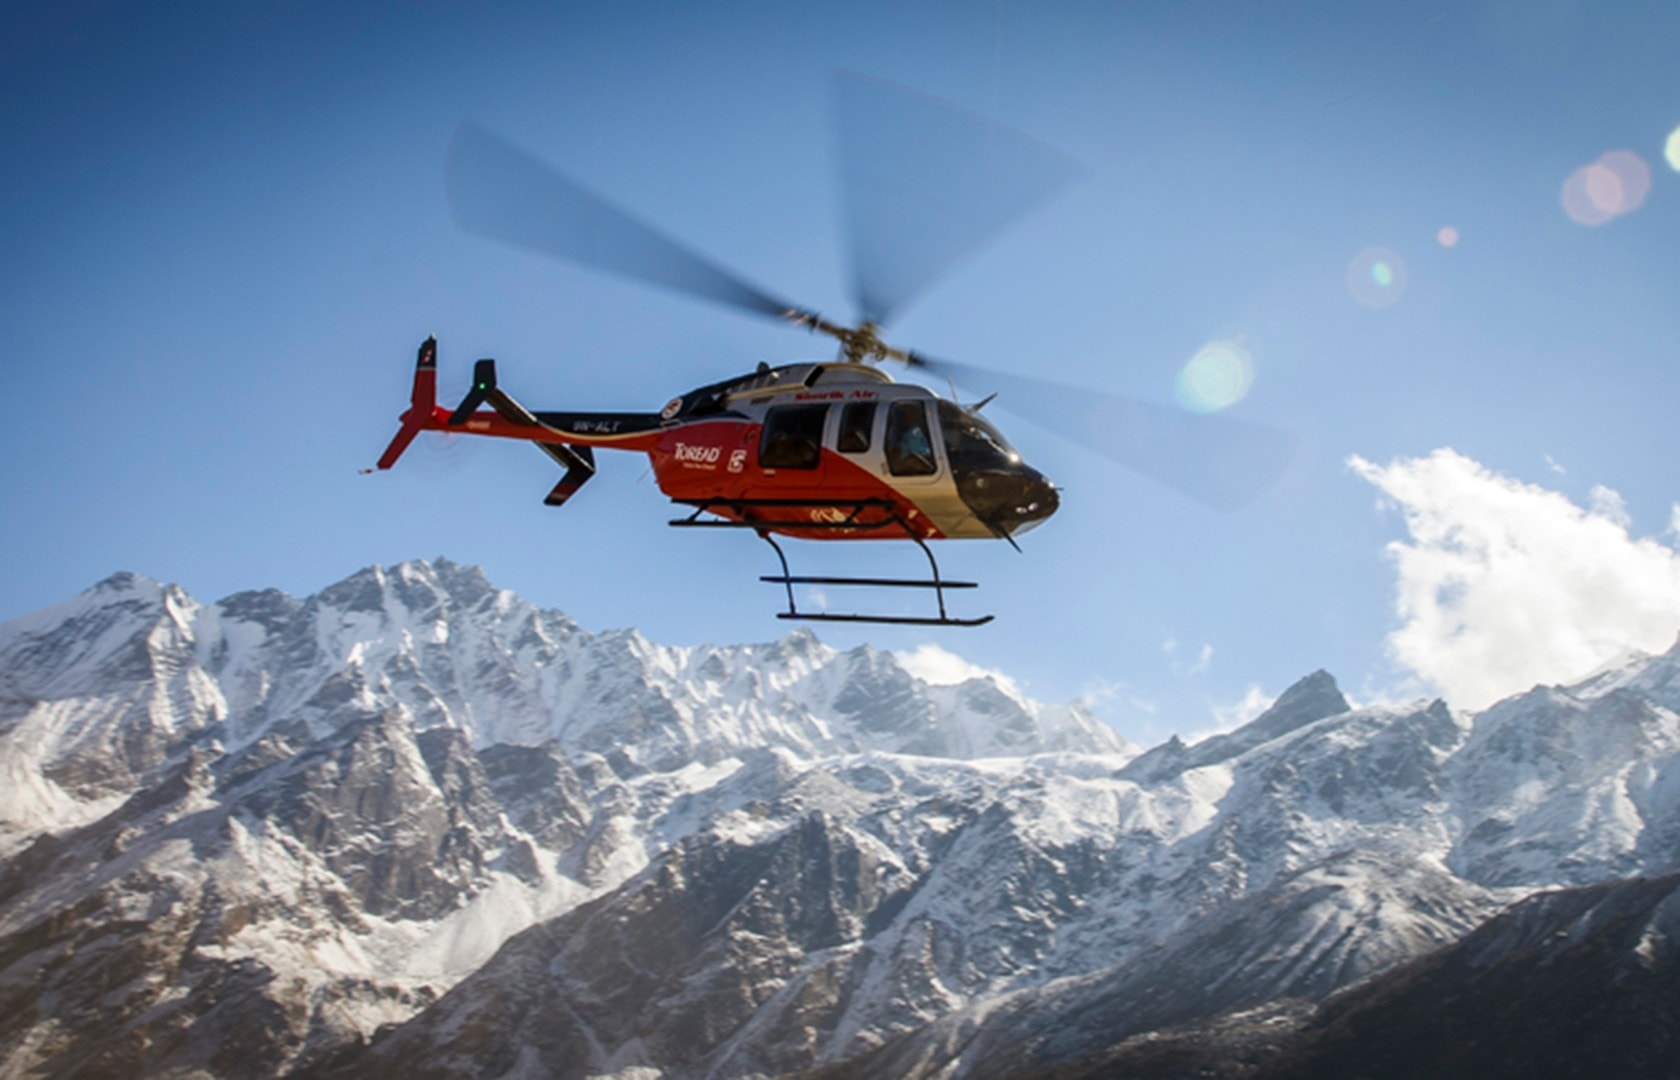 Everest Trek and Fly back by Helicopter